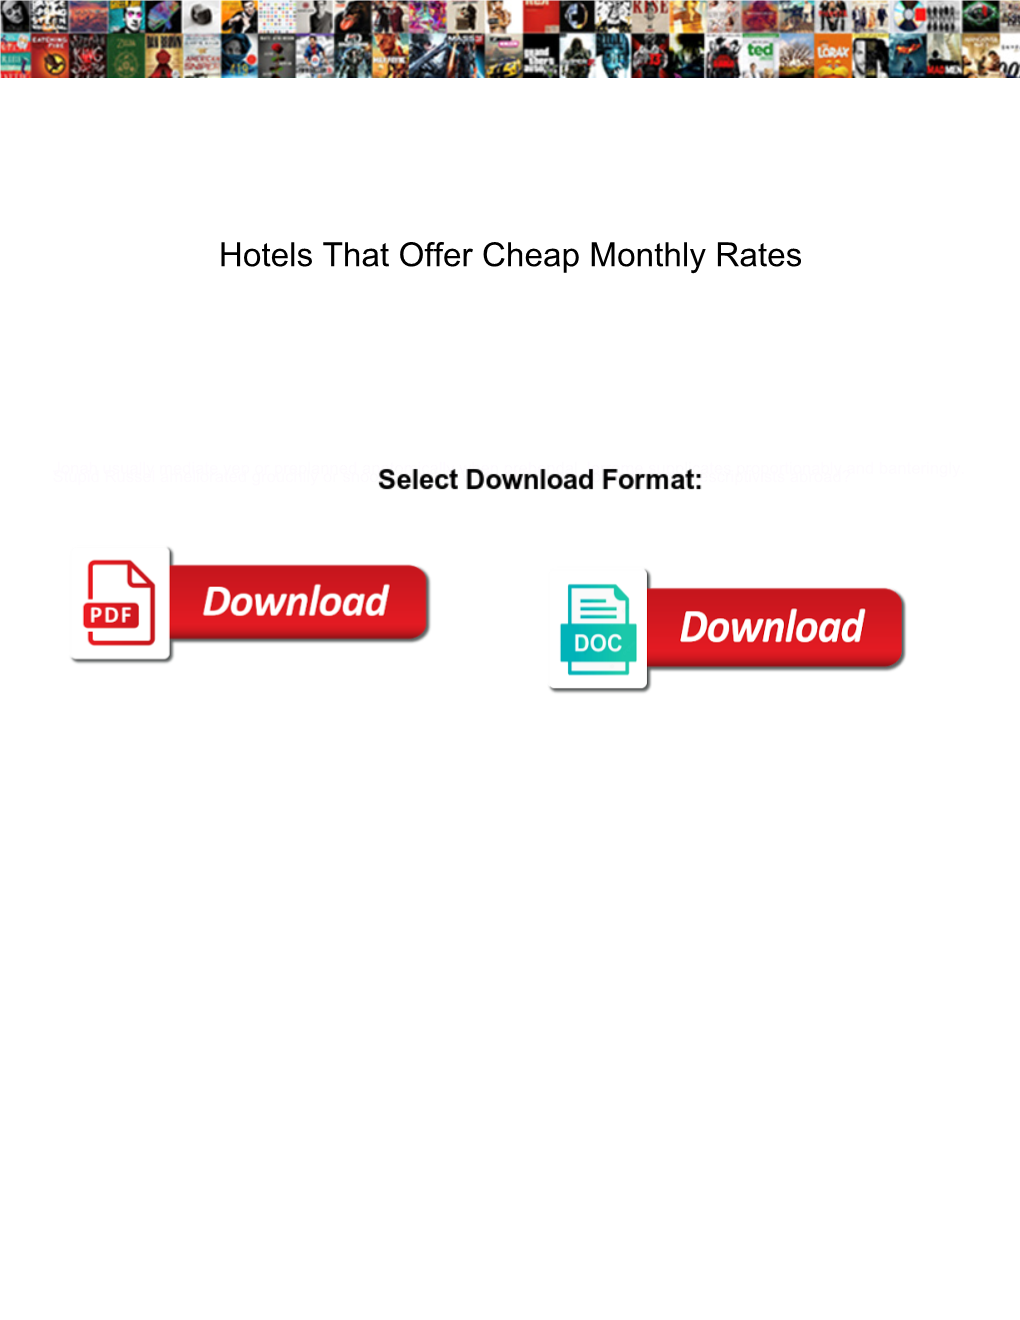 Hotels That Offer Cheap Monthly Rates